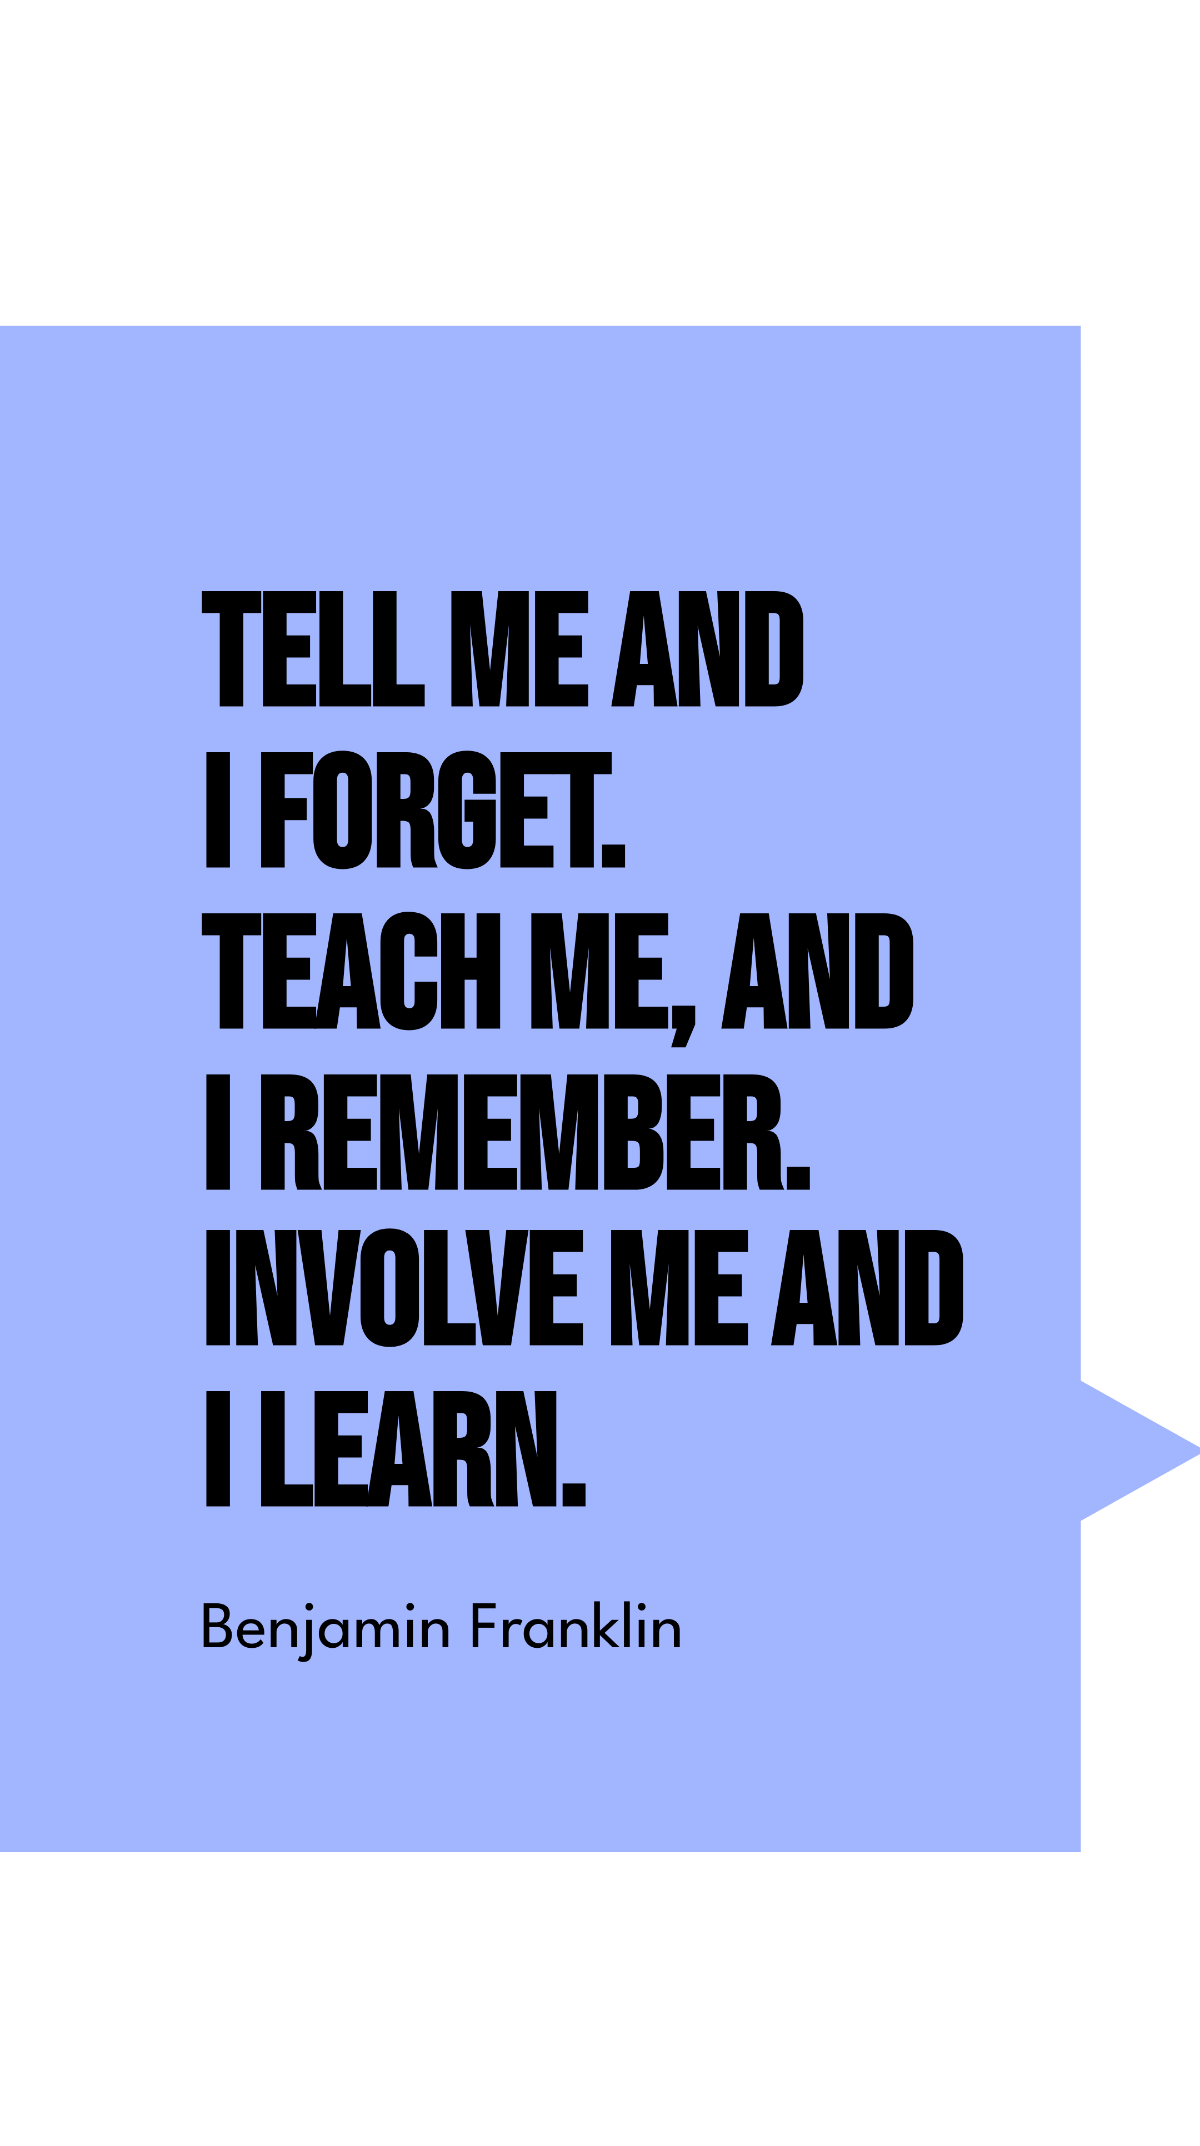 Benjamin Franklin - Tell me and I forget. Teach me, and I remember. Involve me and I learn.